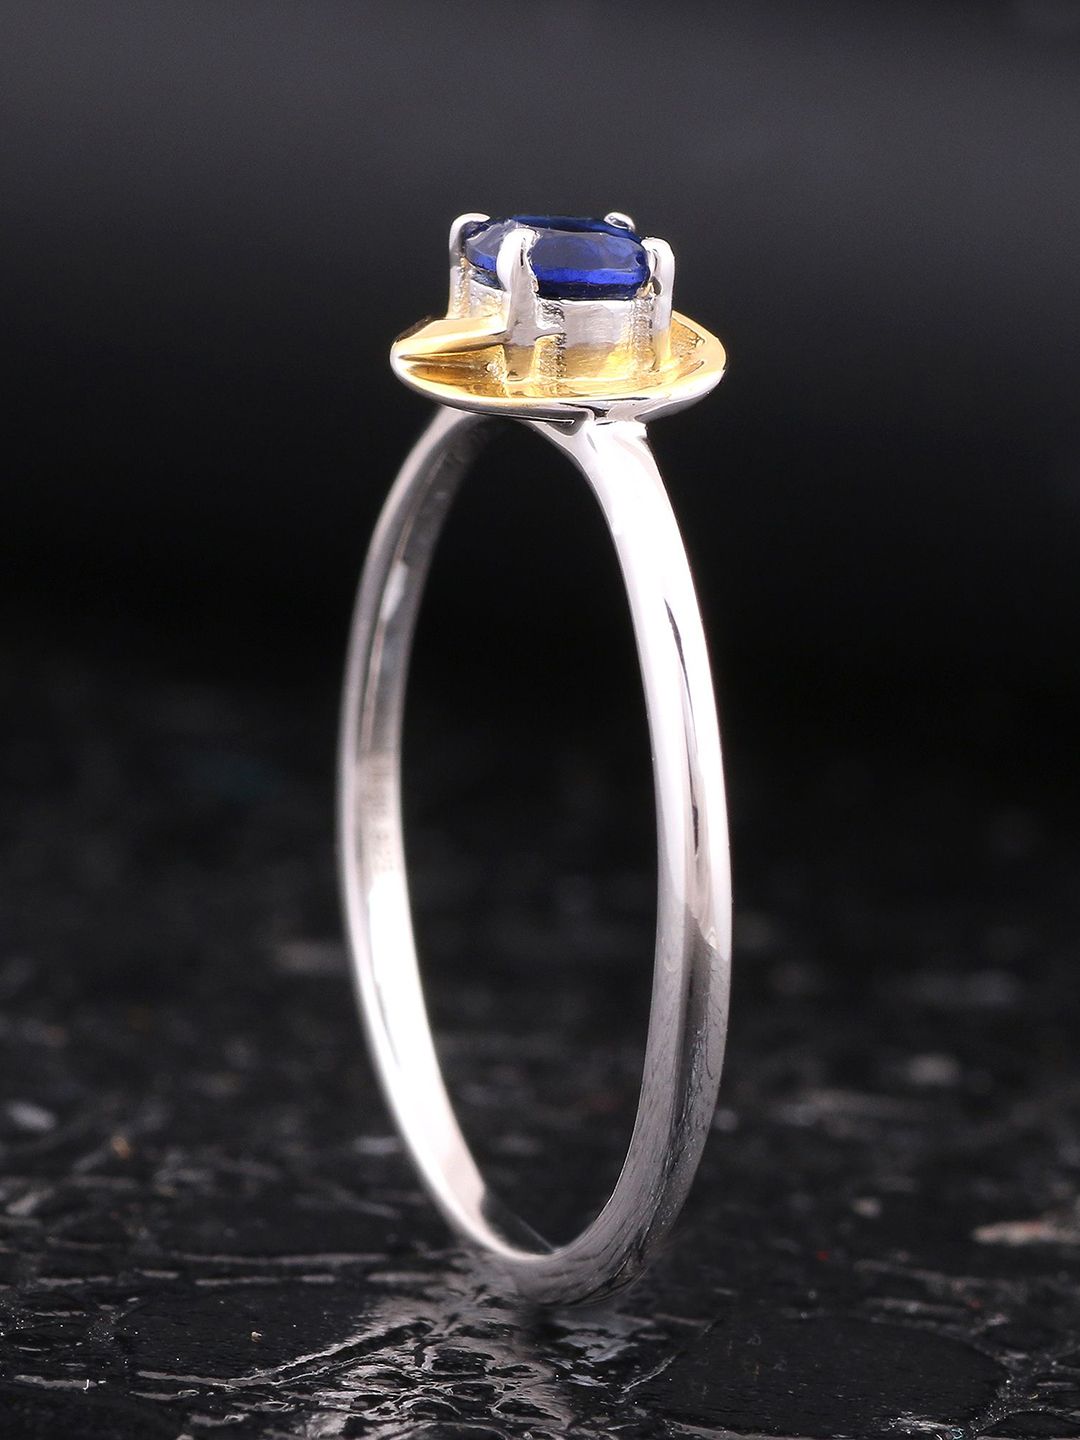 Silgo Gold-Plated Blue Cubic Zirconia-Studded Finger Ring Price in India